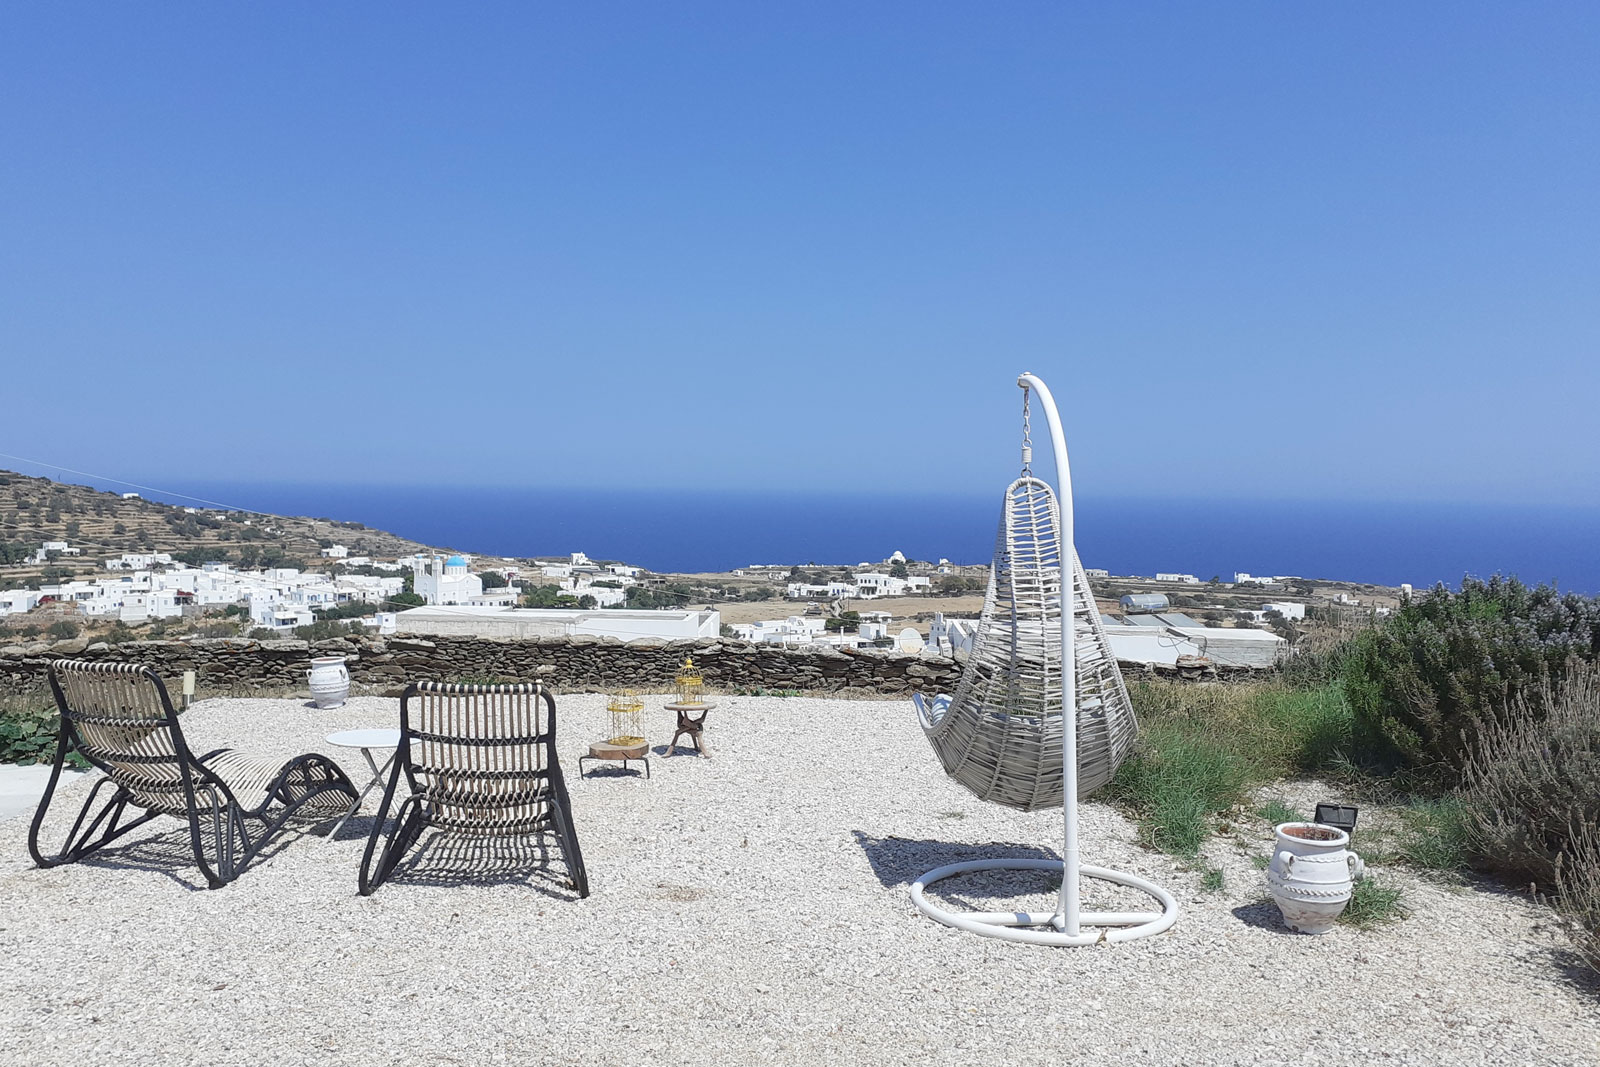 The location of ViewLight in Sifnos